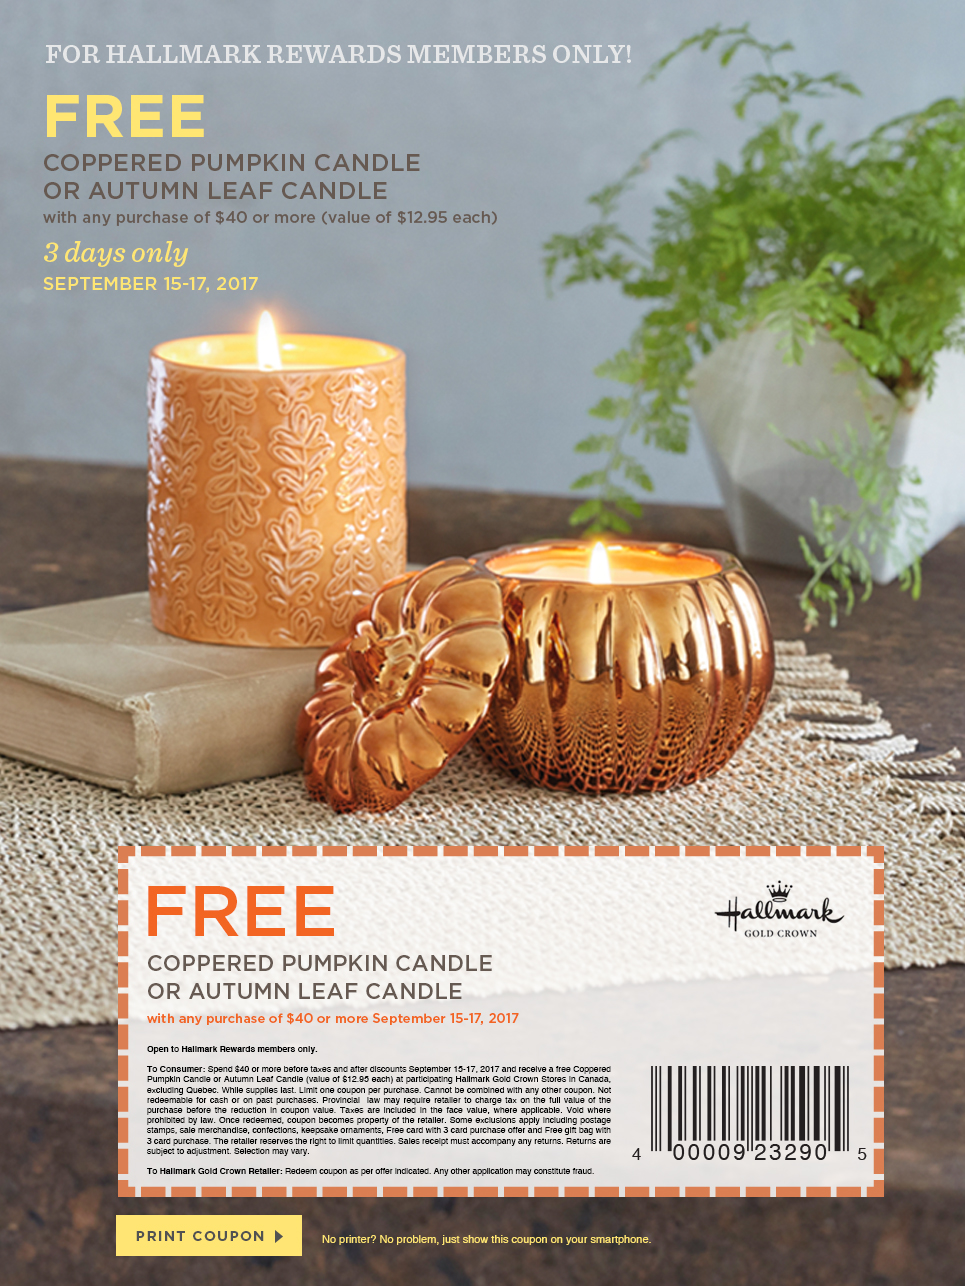 FREE Coppered Pumpkin Candle or Autumn Leaf Candle